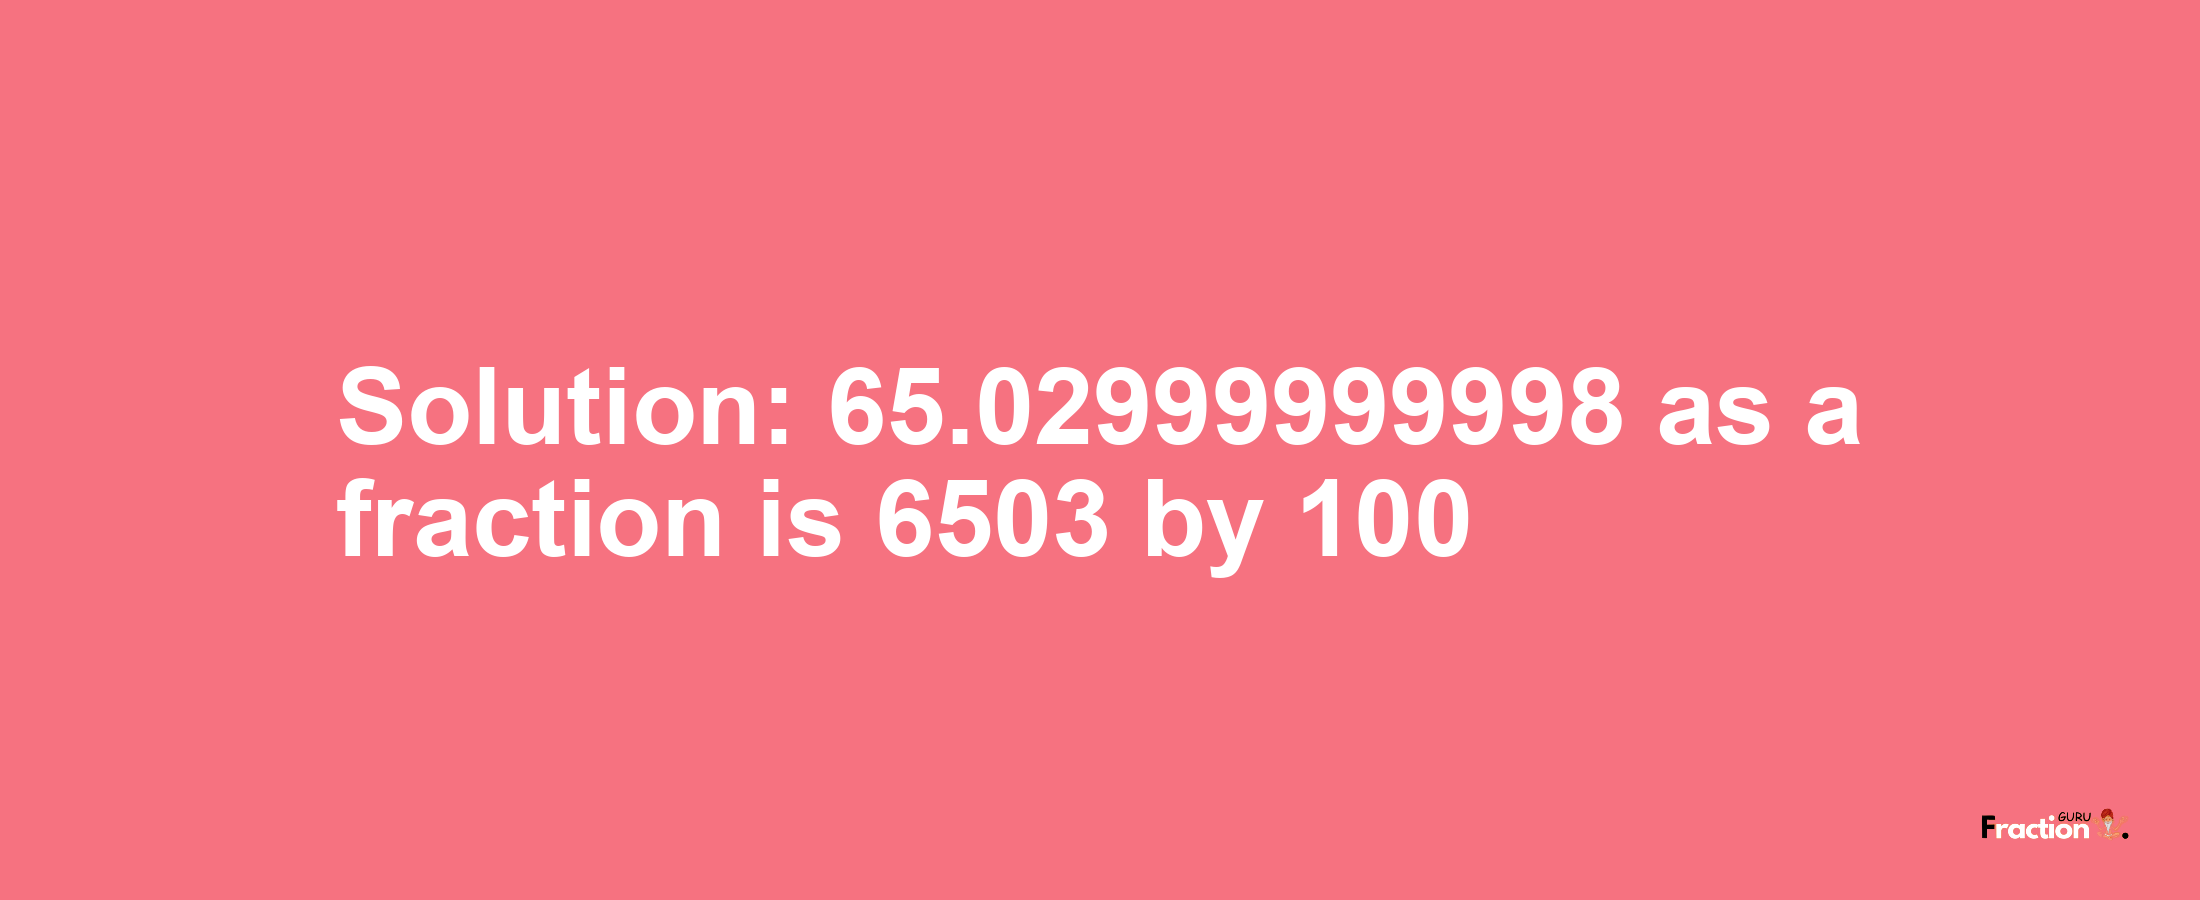 Solution:65.02999999998 as a fraction is 6503/100